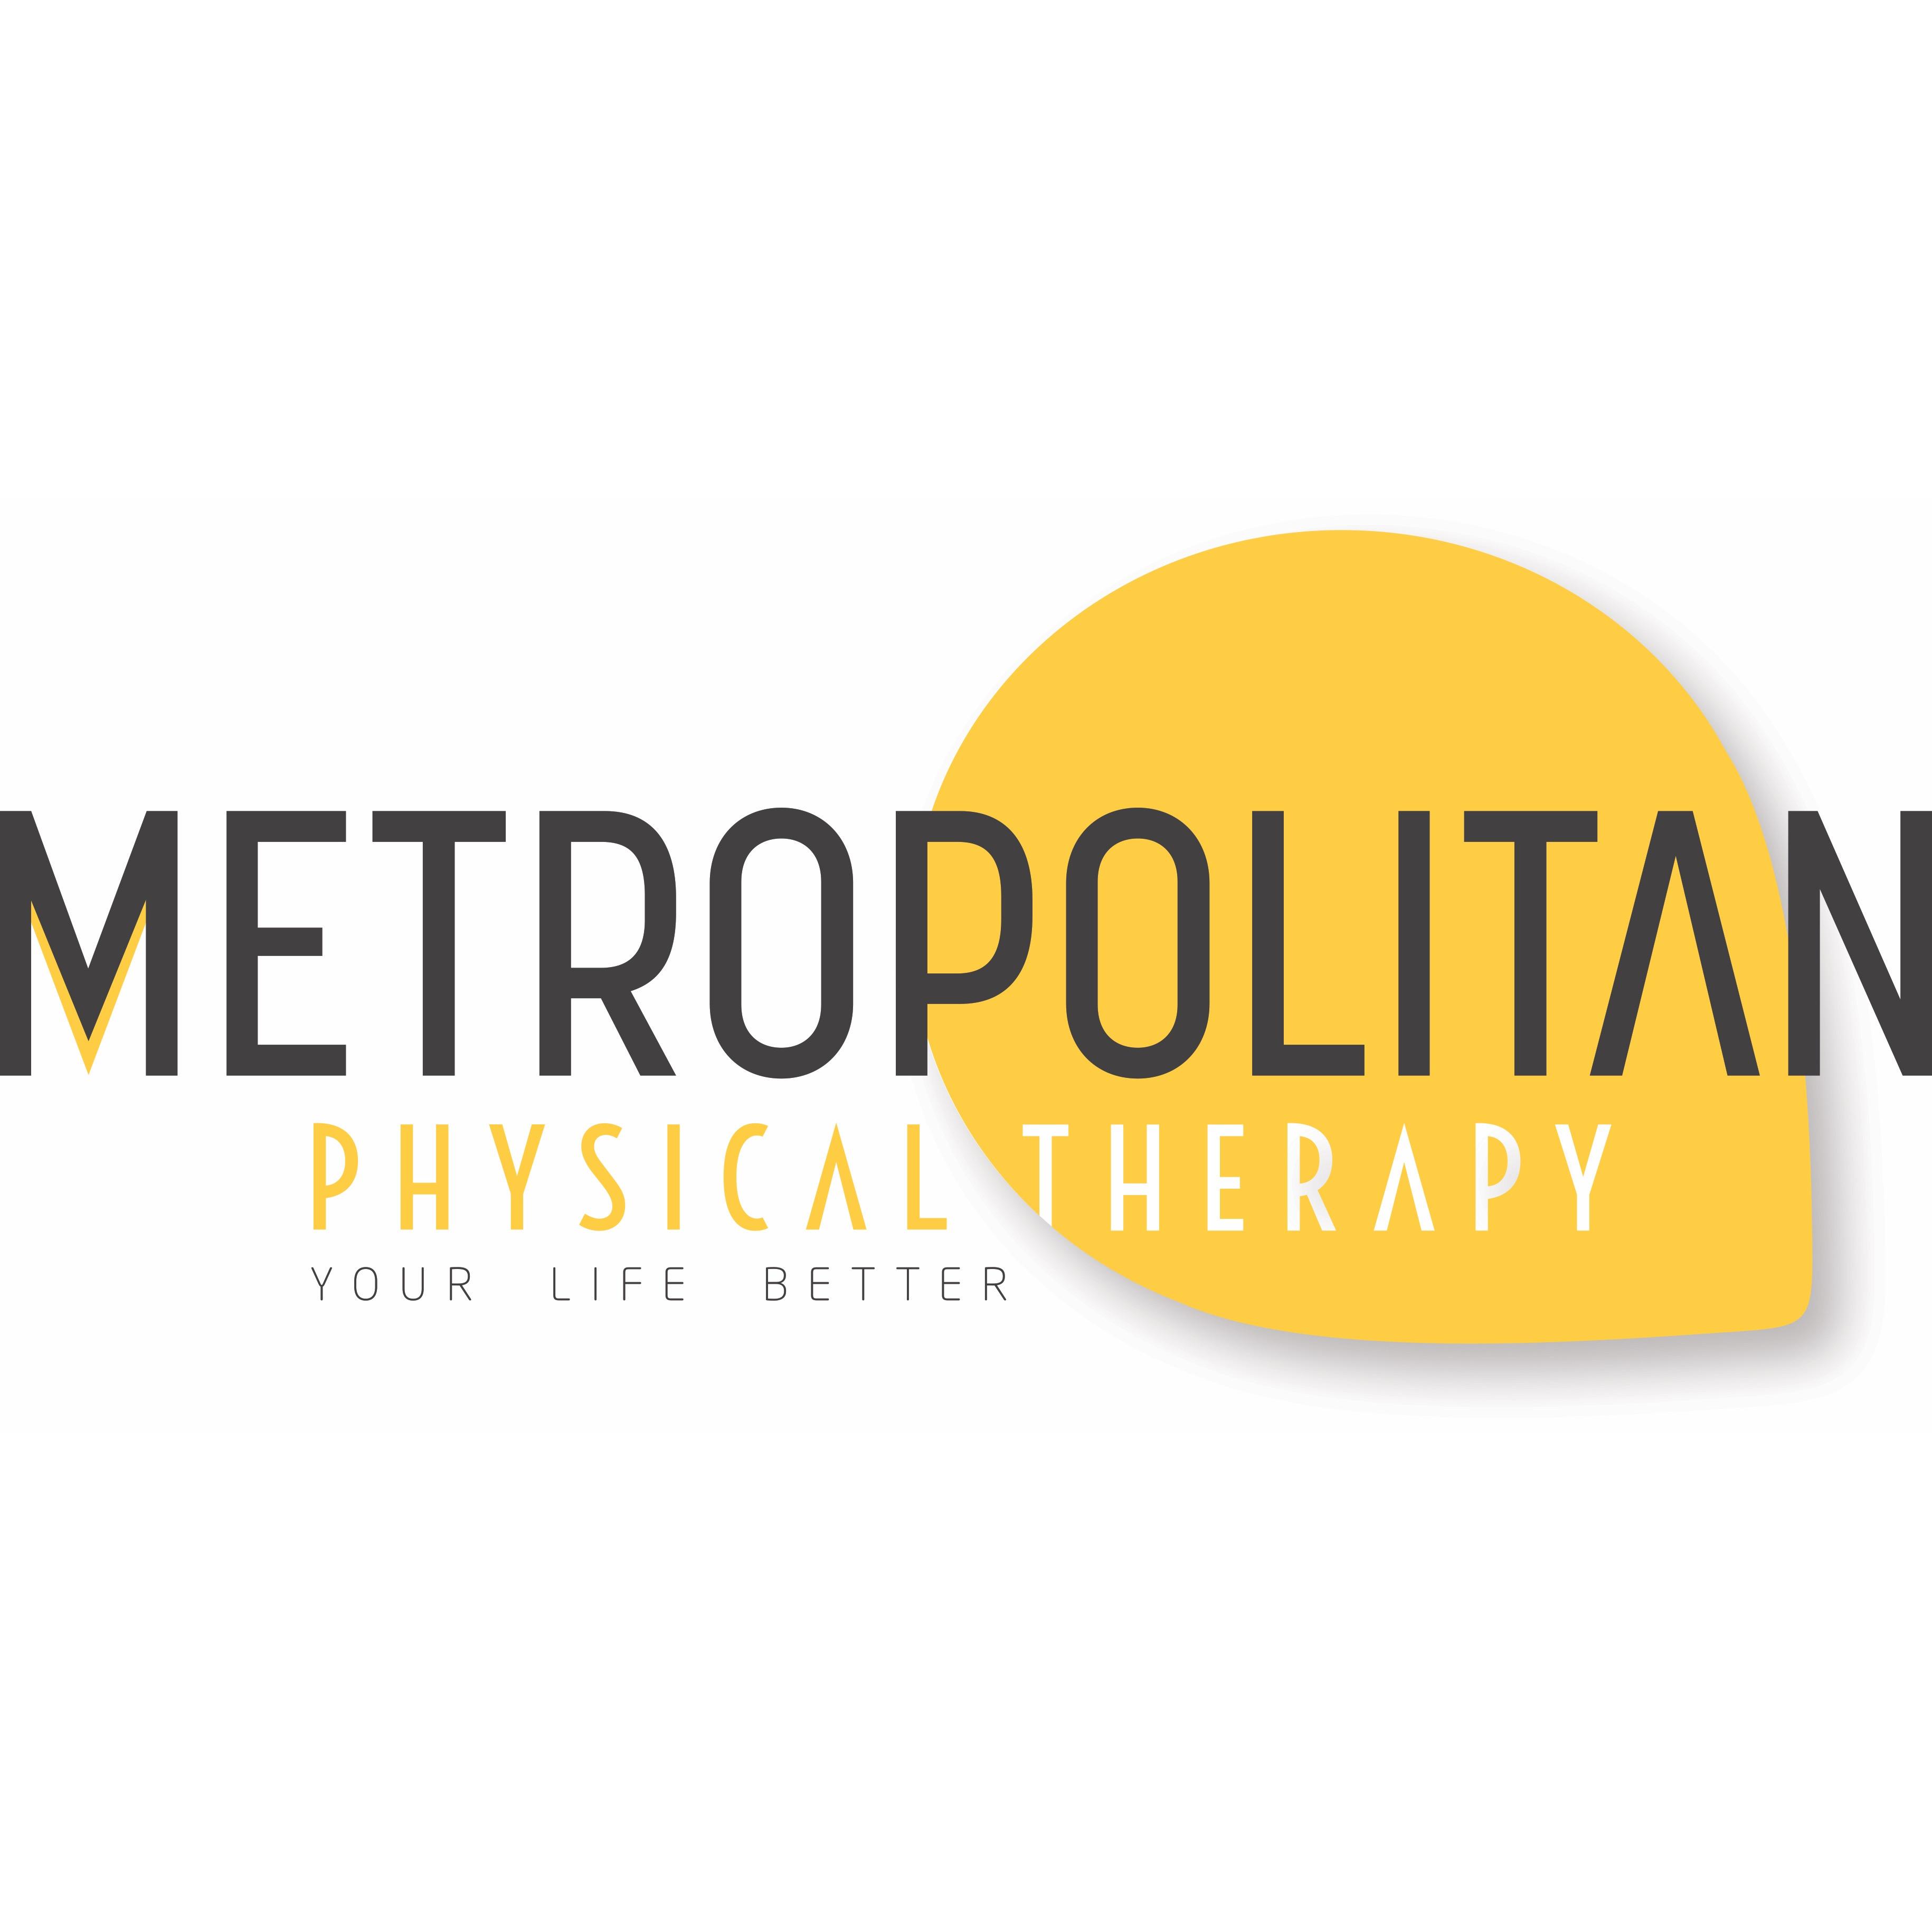 Metropolitan Physical Therapy - Lafayette, CO 80026 - (303)665-2405 | ShowMeLocal.com